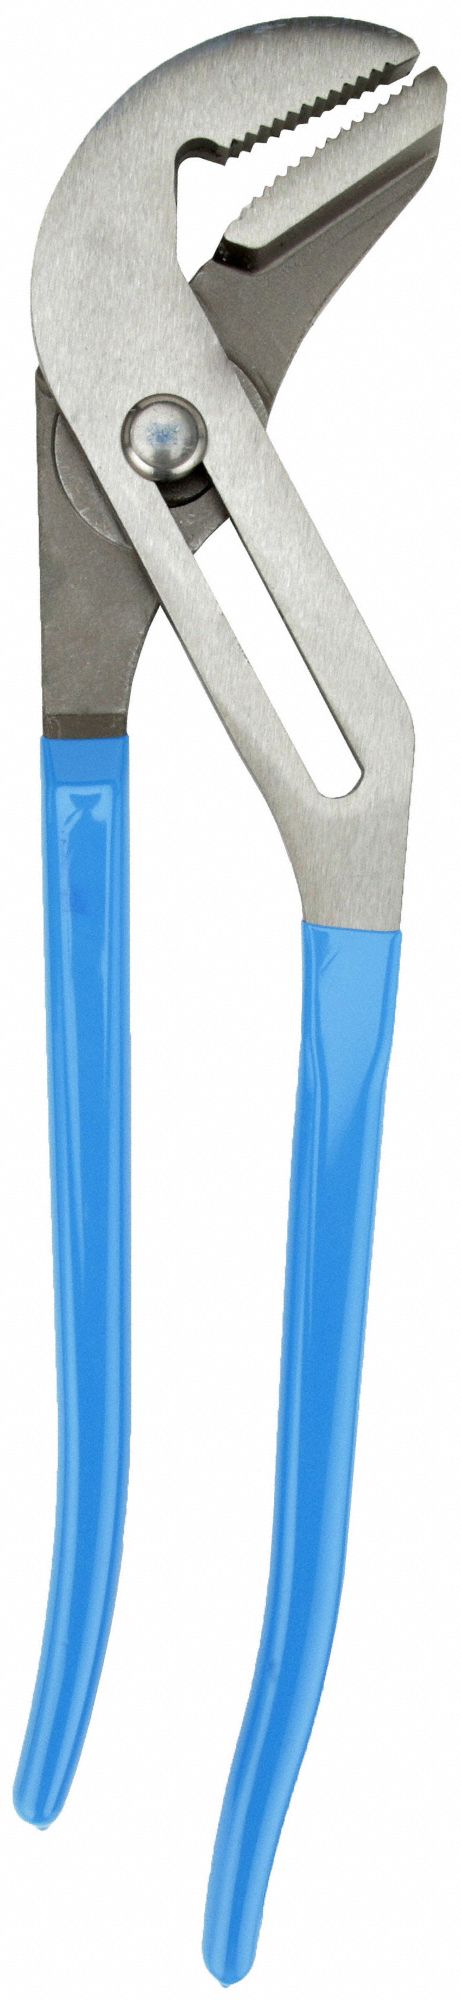 CHANNELLOCK PLIERS TONGUE+GROOVE,16-1/2 IN - Adjustable Tongue and Groove  Pliers - CNL460